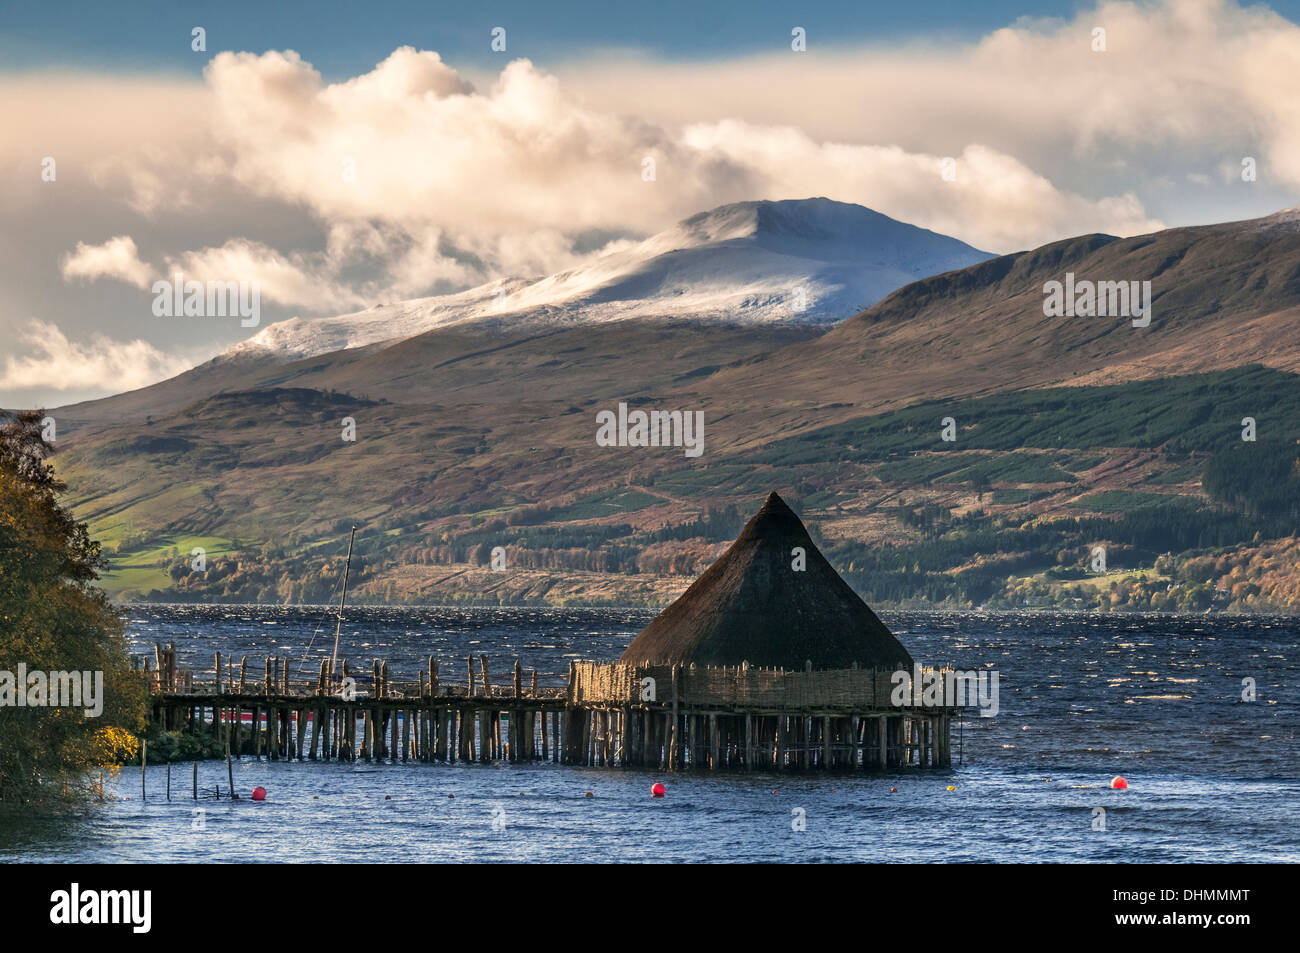 The Scottish Crannog Centre on Loch Tay in Perthshire. Snowy Ben Lawers in the background Stock Photo